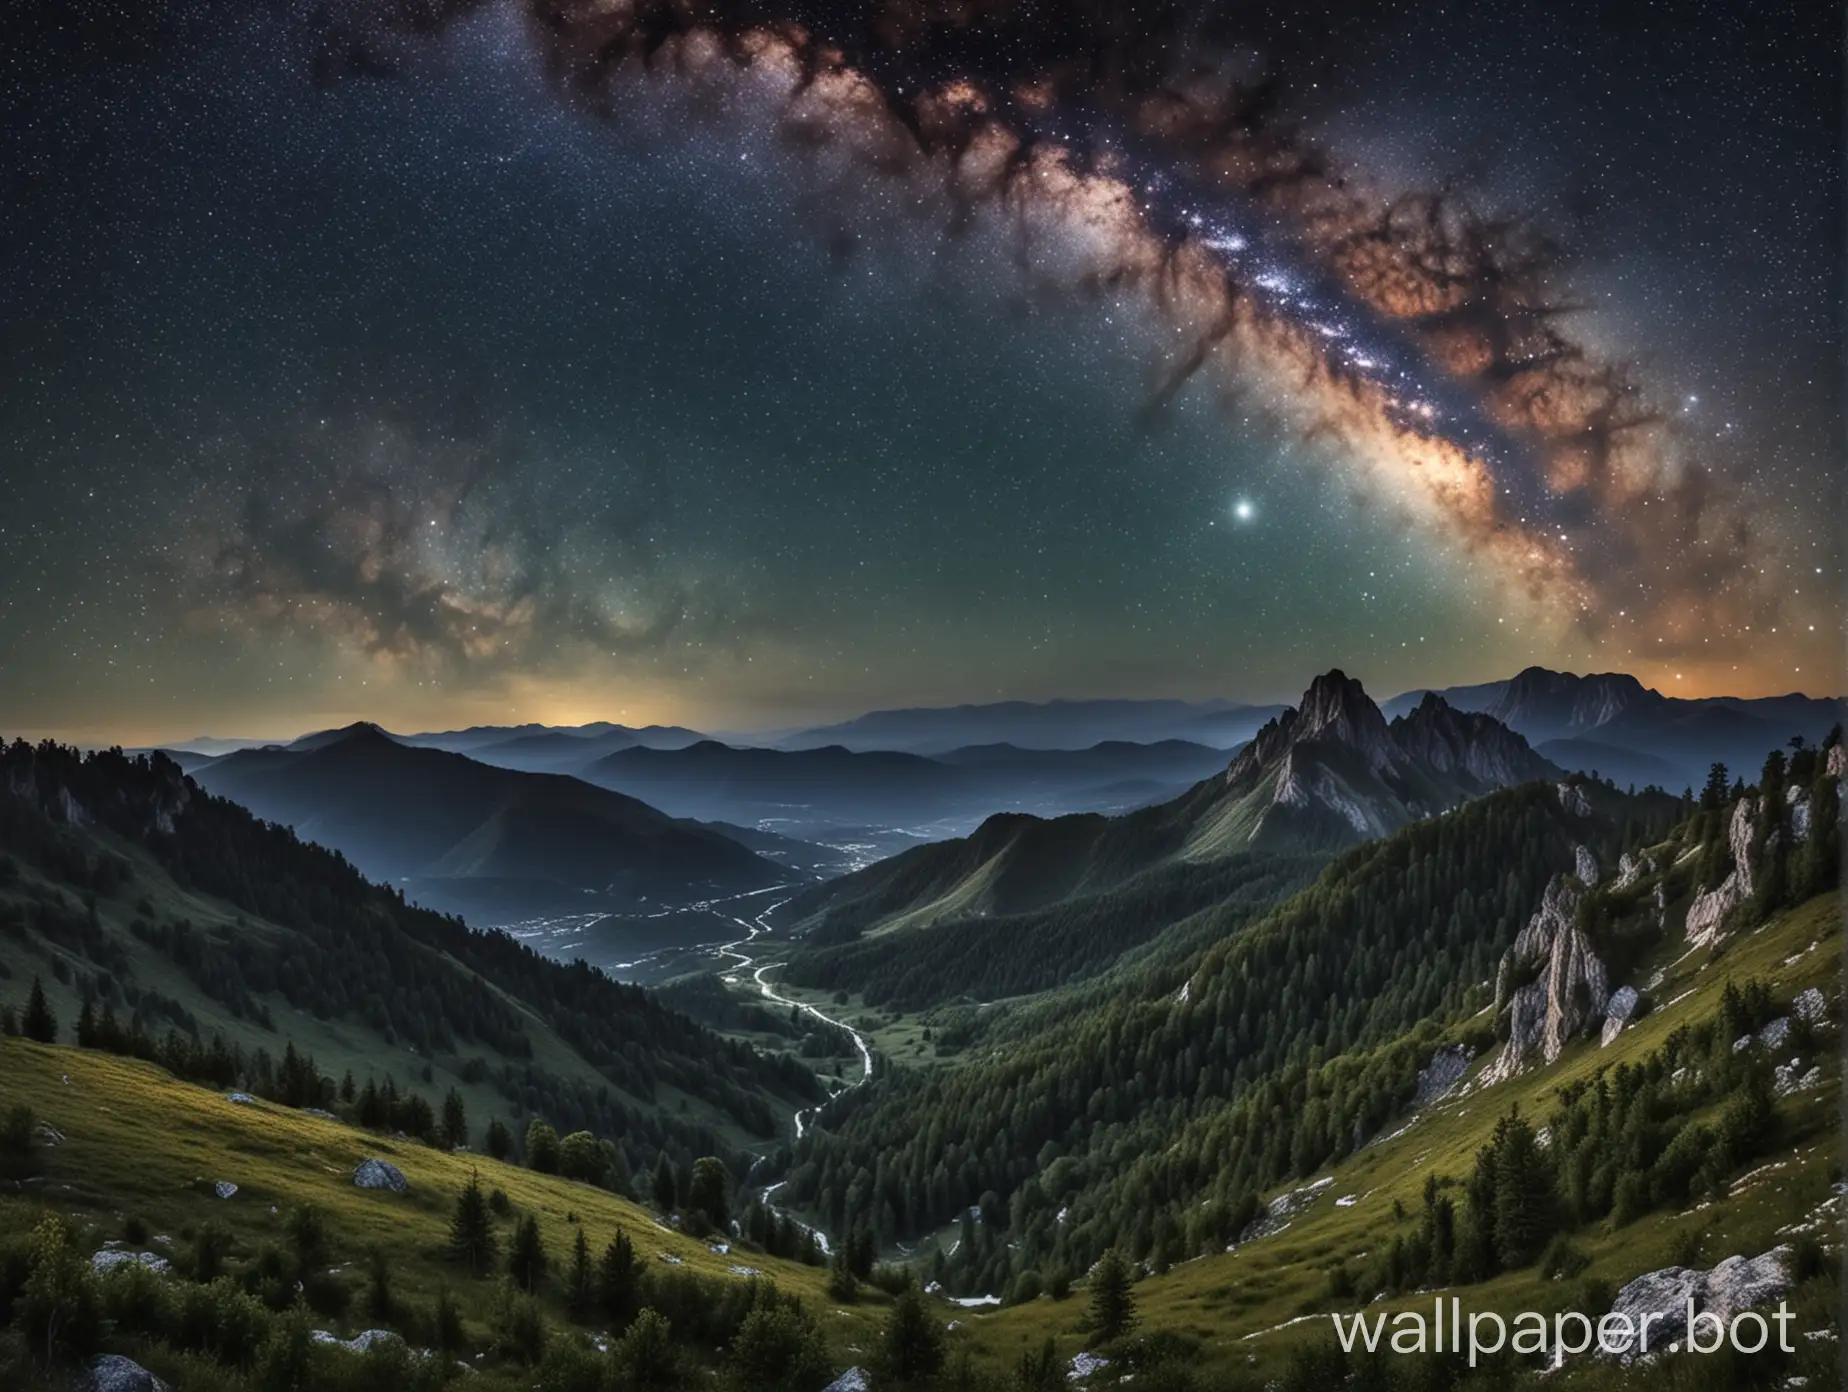 gorgeous mountainous landscapes with a beautiful view of the milky way night sky